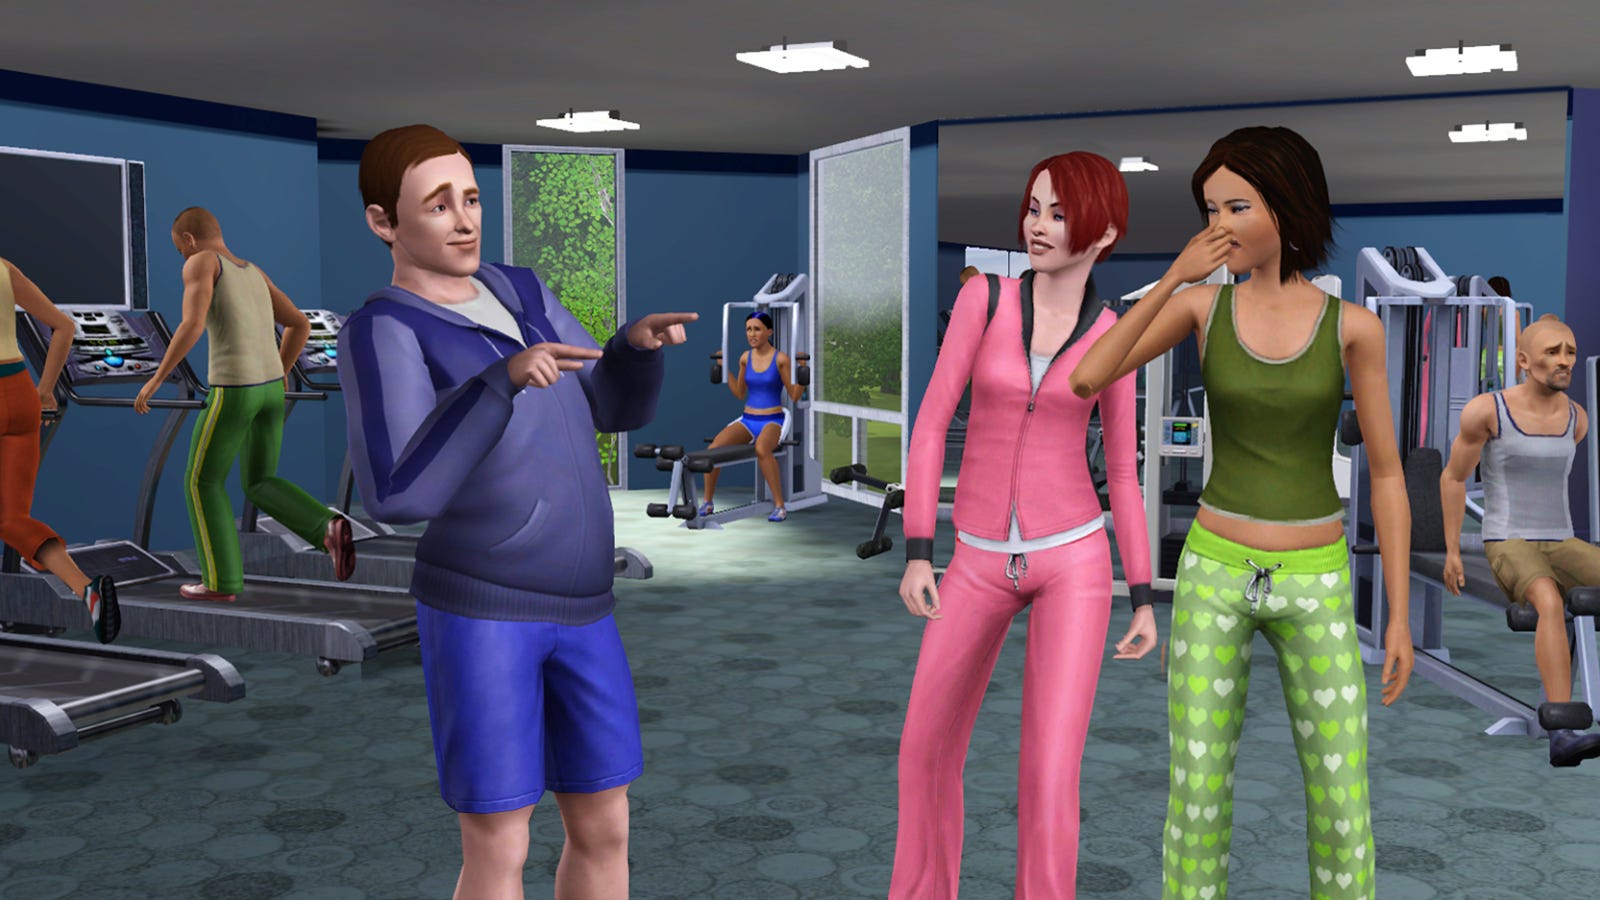 hacker-likes-using-the-sims-3-torrents-to-acquire-women-slaves